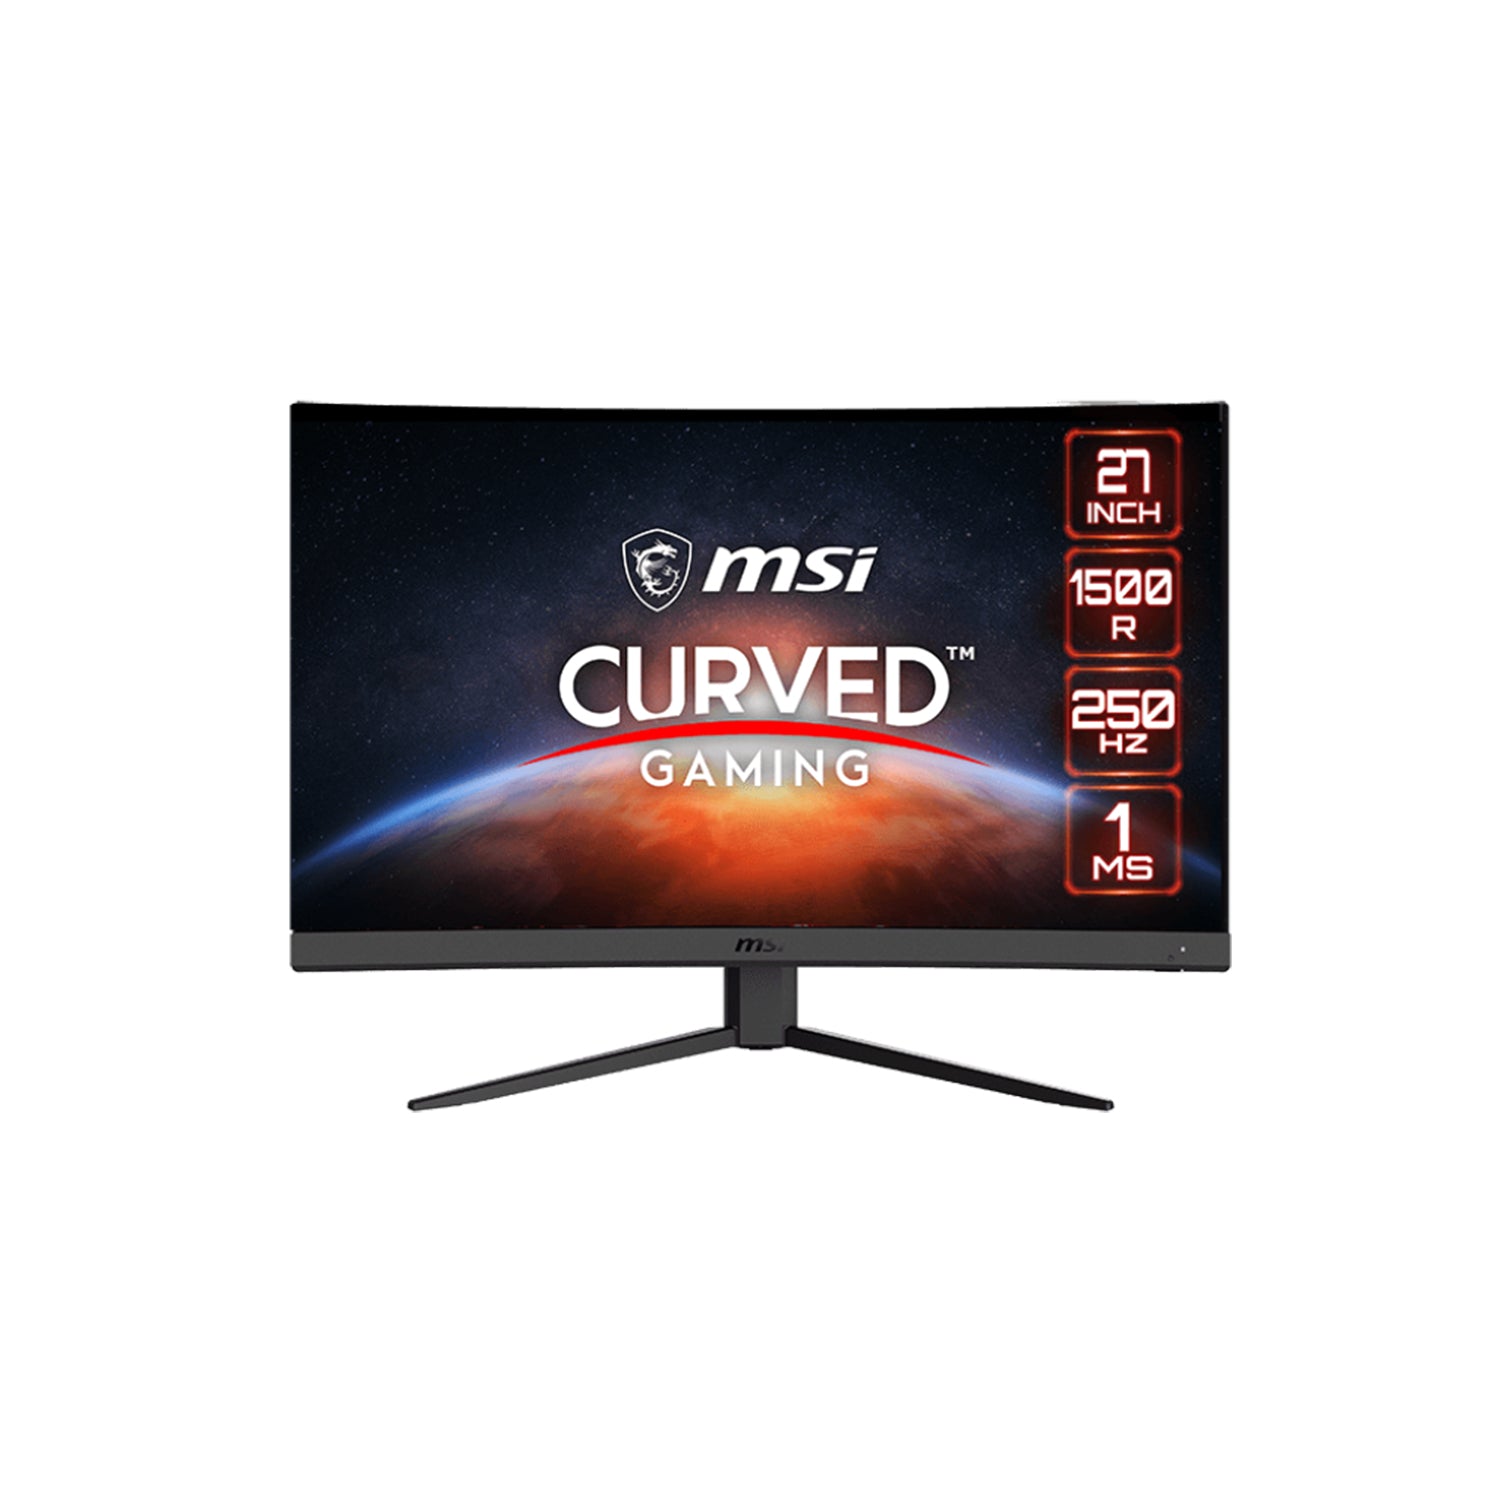 MSI (G27C4X) 27-Inch Curved Gaming Monitor VA | 1500R Curvature |  250 Hz Refresh Rate HDR Ready | 1920 x 1080 Resolution | Adaptive Sync | 1x DisplayPort 1.2a - 2x HDMI 2.0